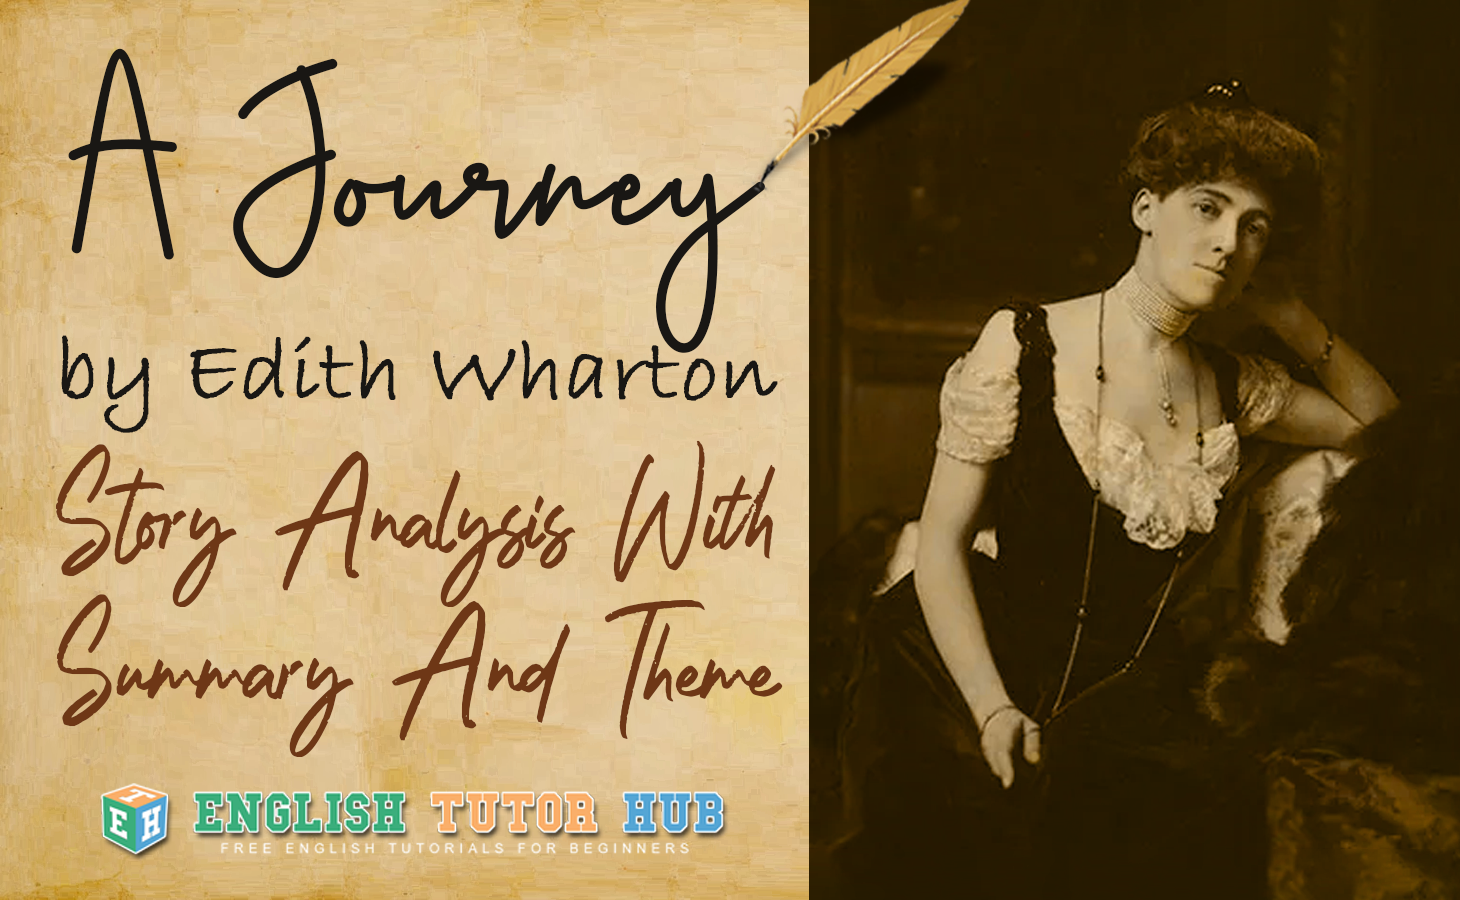 A Journey by Edith Wharton Story Analysis with Summary and Theme